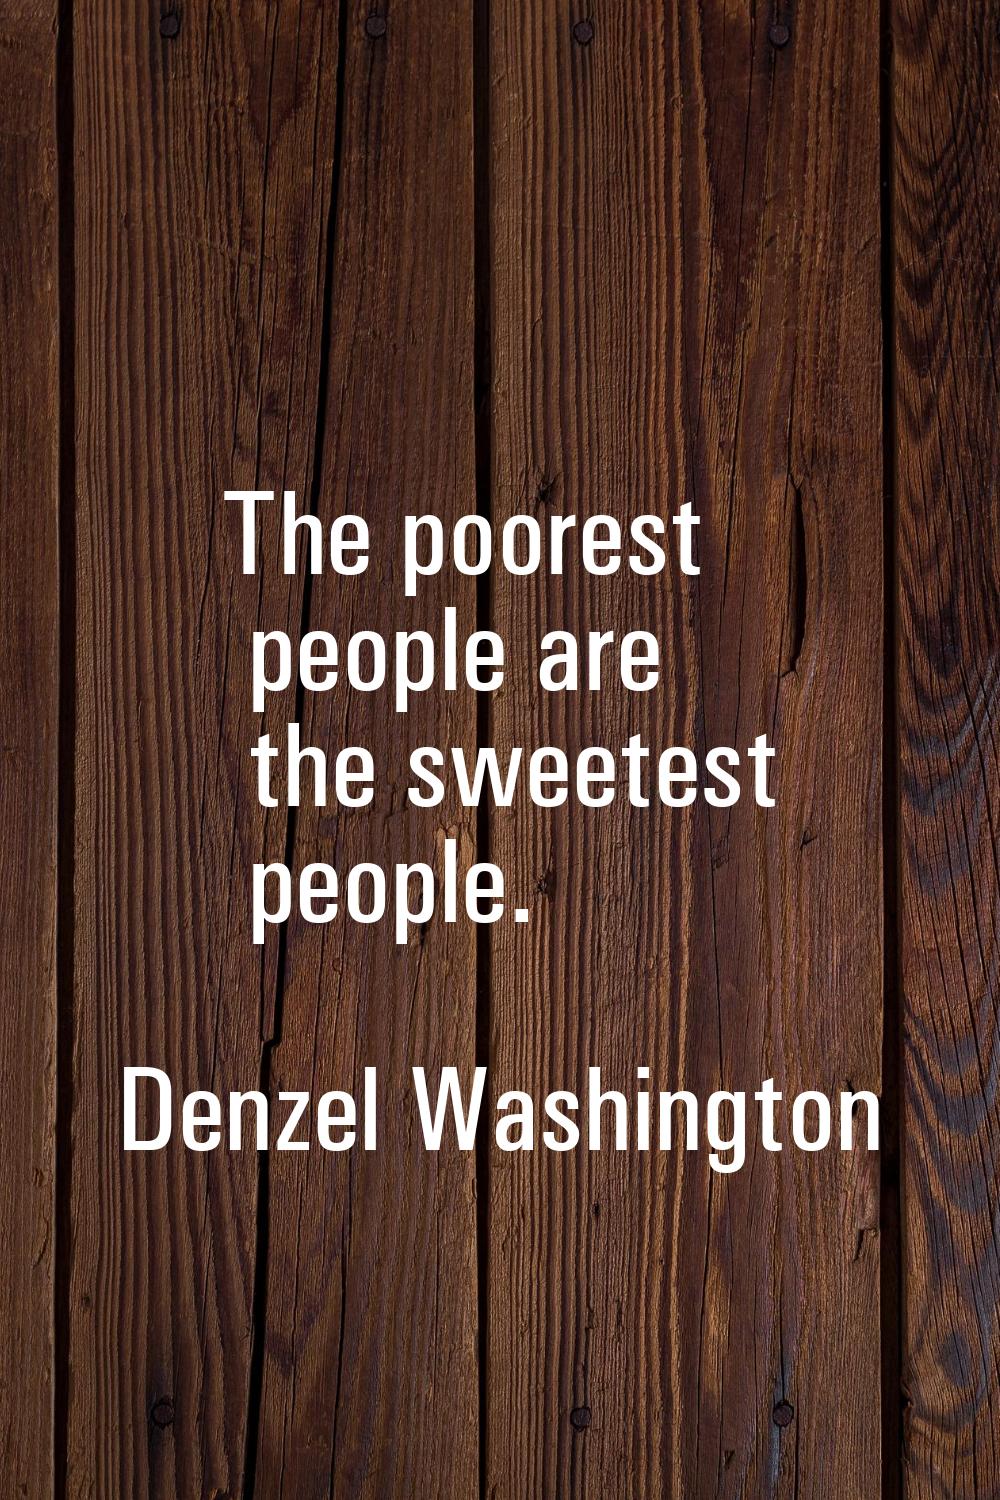 The poorest people are the sweetest people.